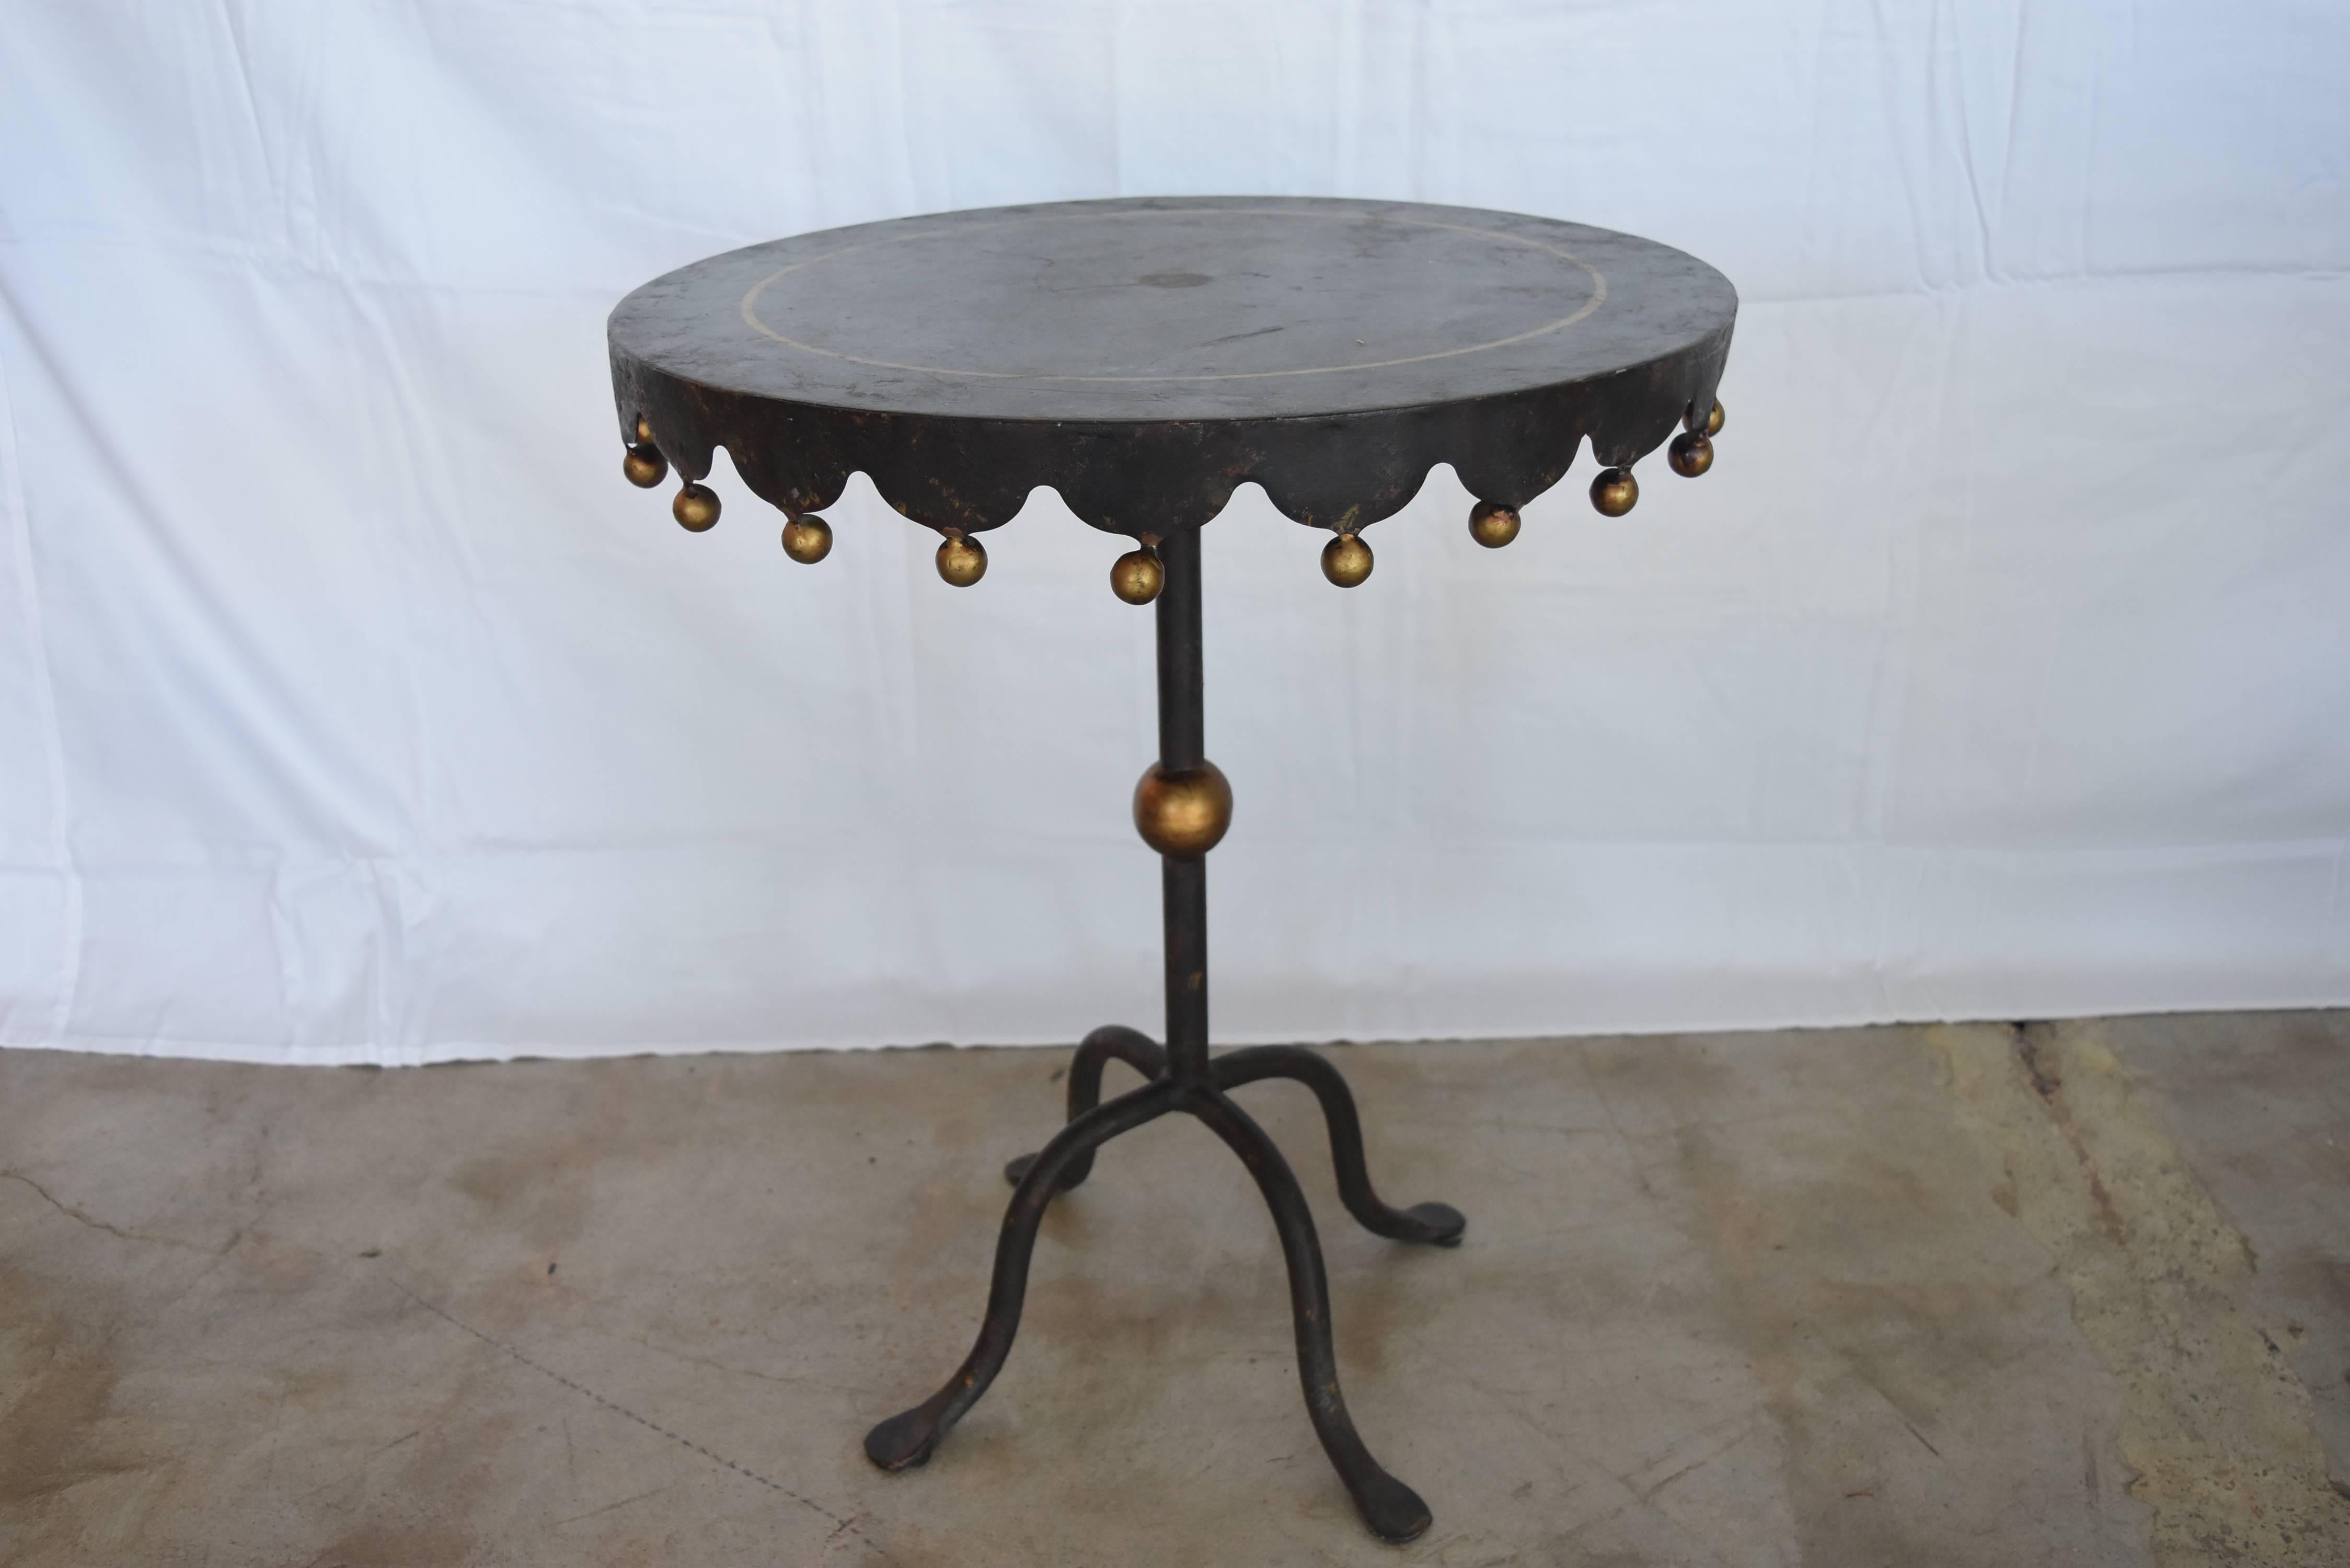 Midcentury Iron Round Side Table from Spain with Gold Gilt Detail 5